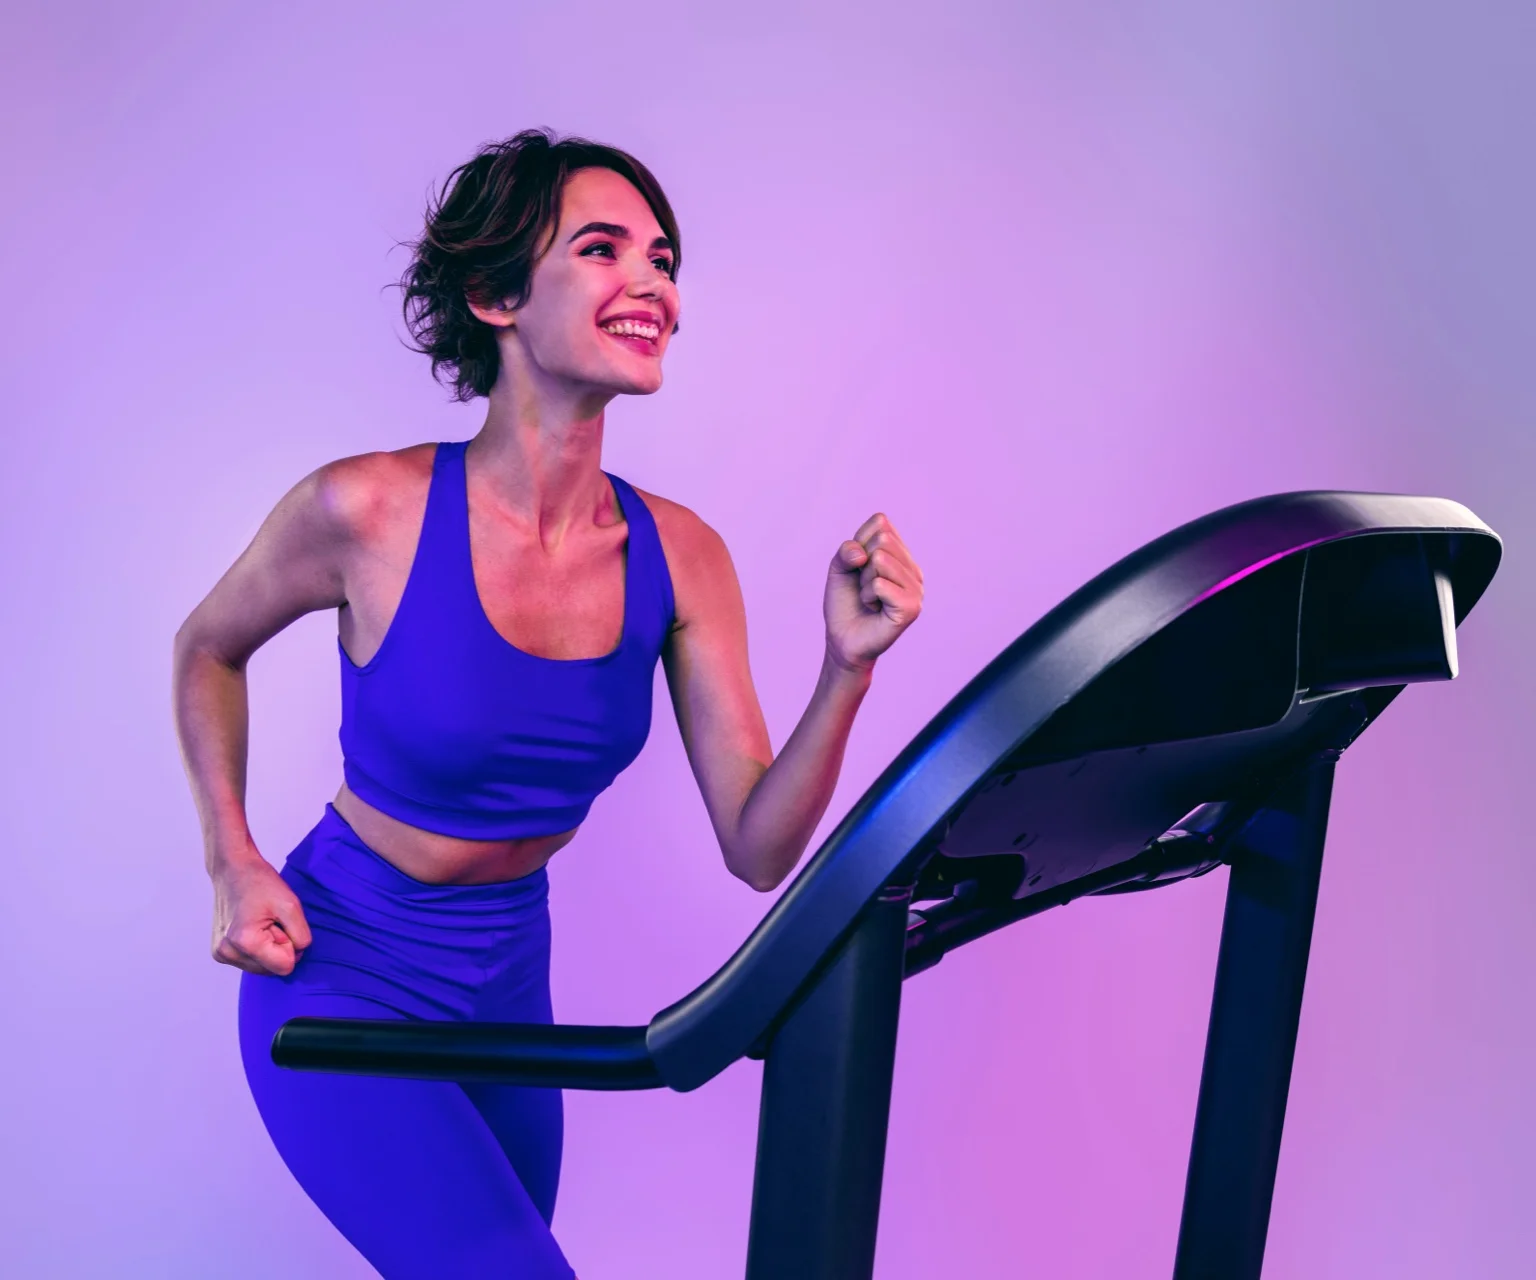 photo - Woman runs on a treadmill. The treadmill is a common cardio exercise at the gym.